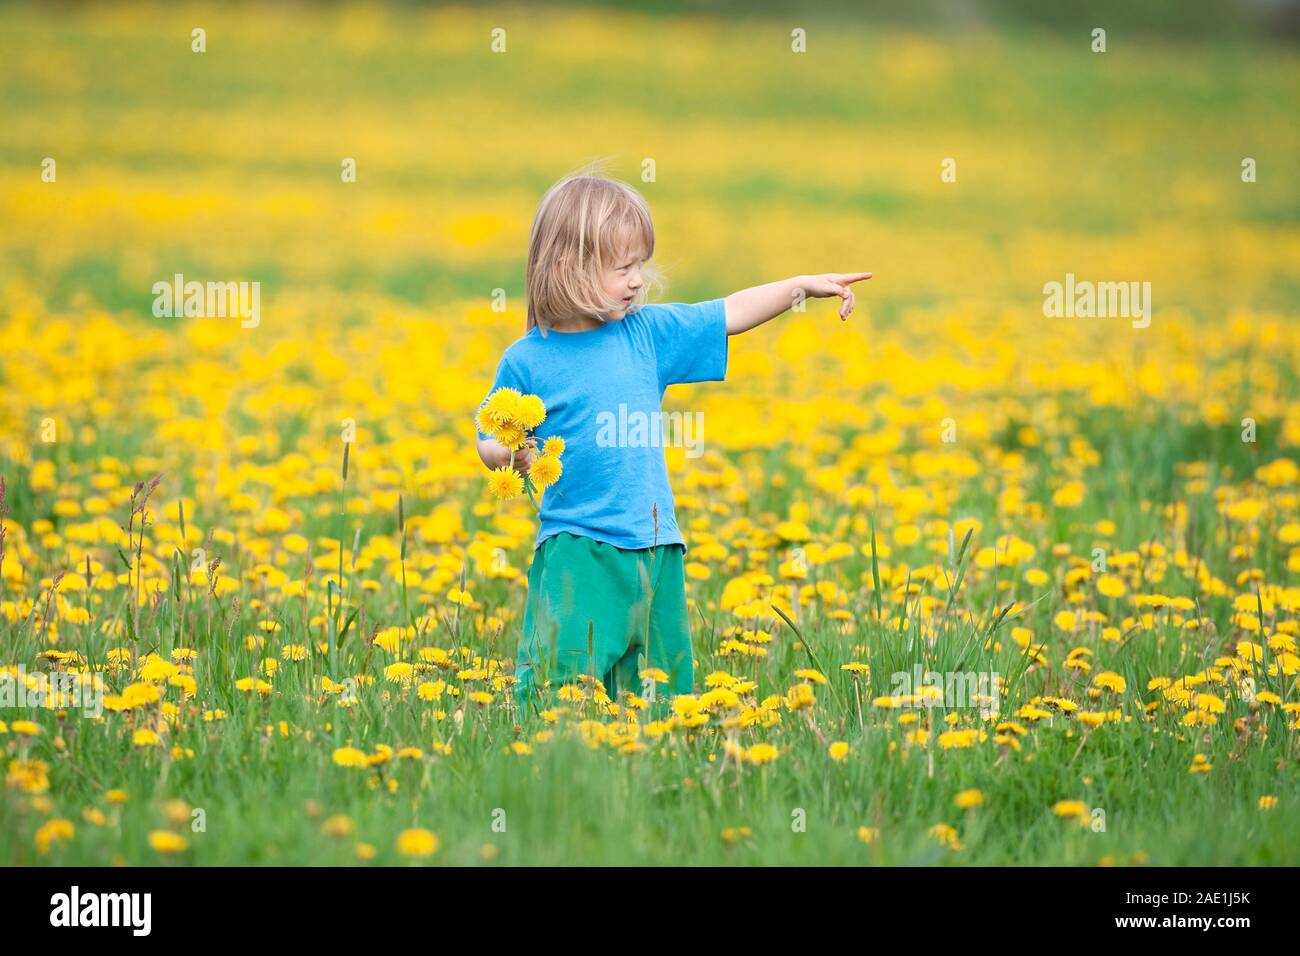 boy with long hair standing in a dandelion field Stock Photo